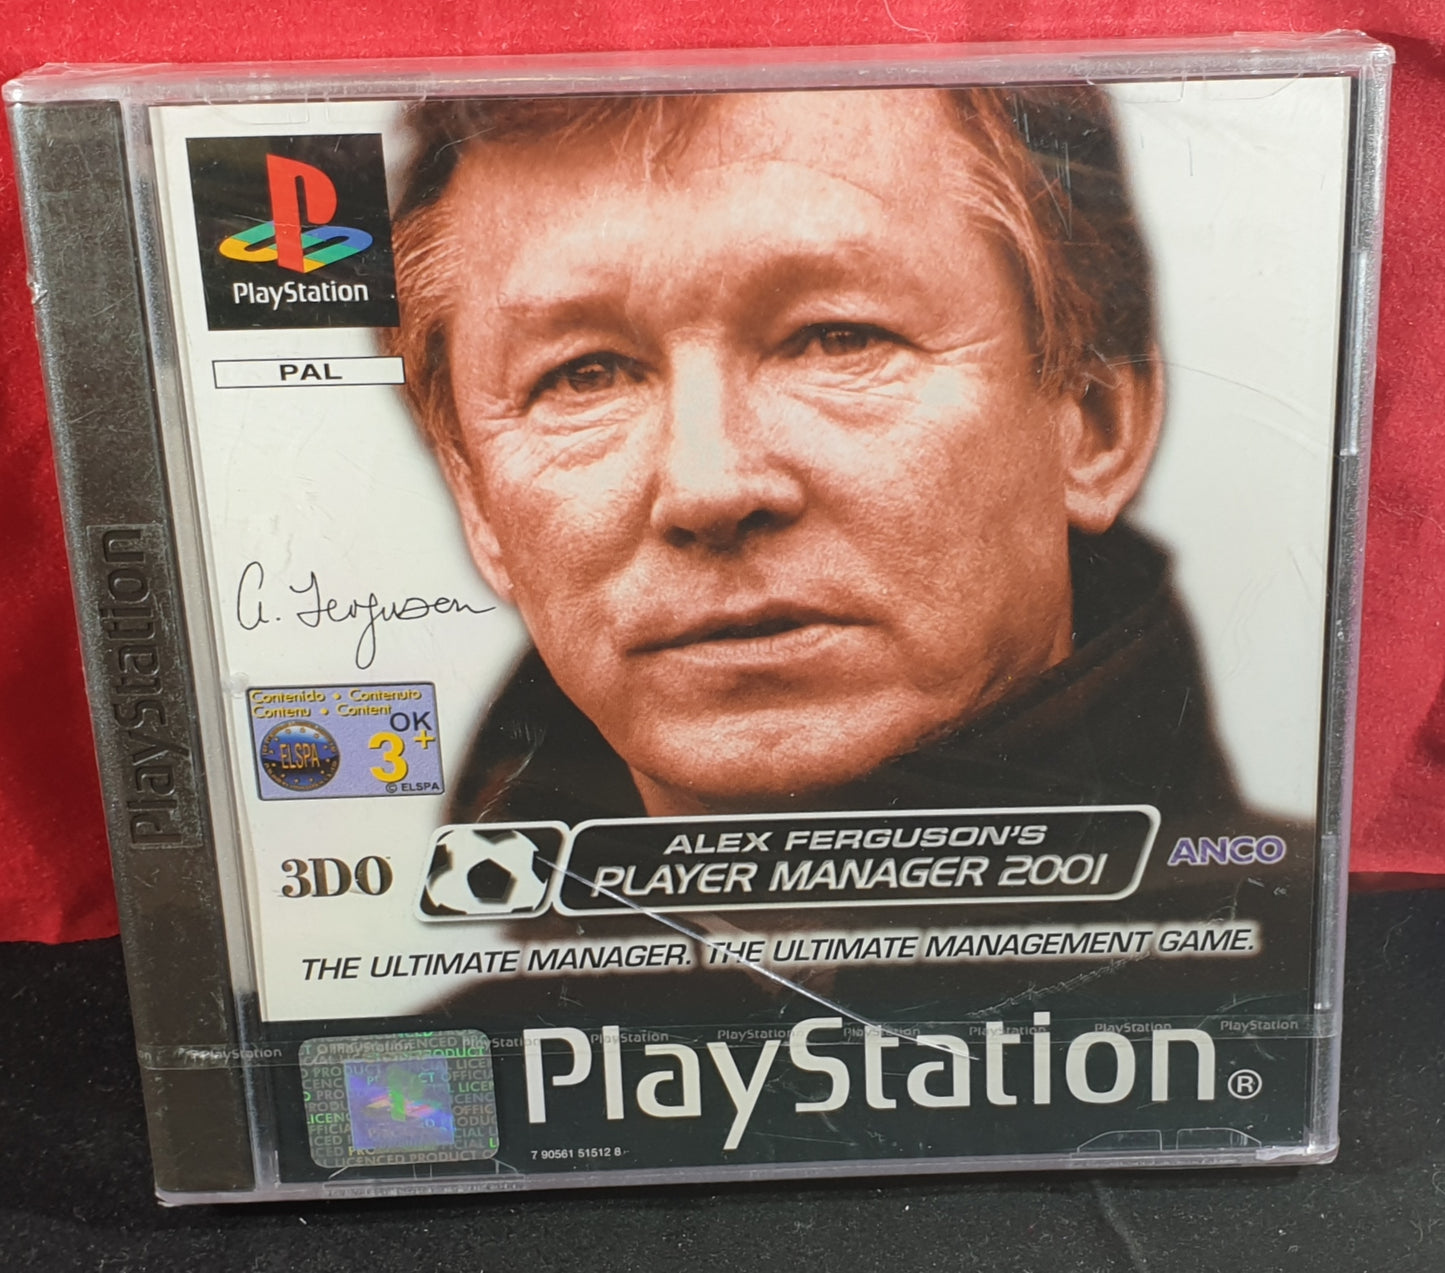 Brand New and Sealed Alex Ferguson's Player Manager 2001 Sony Playstation 1 (PS1) Game